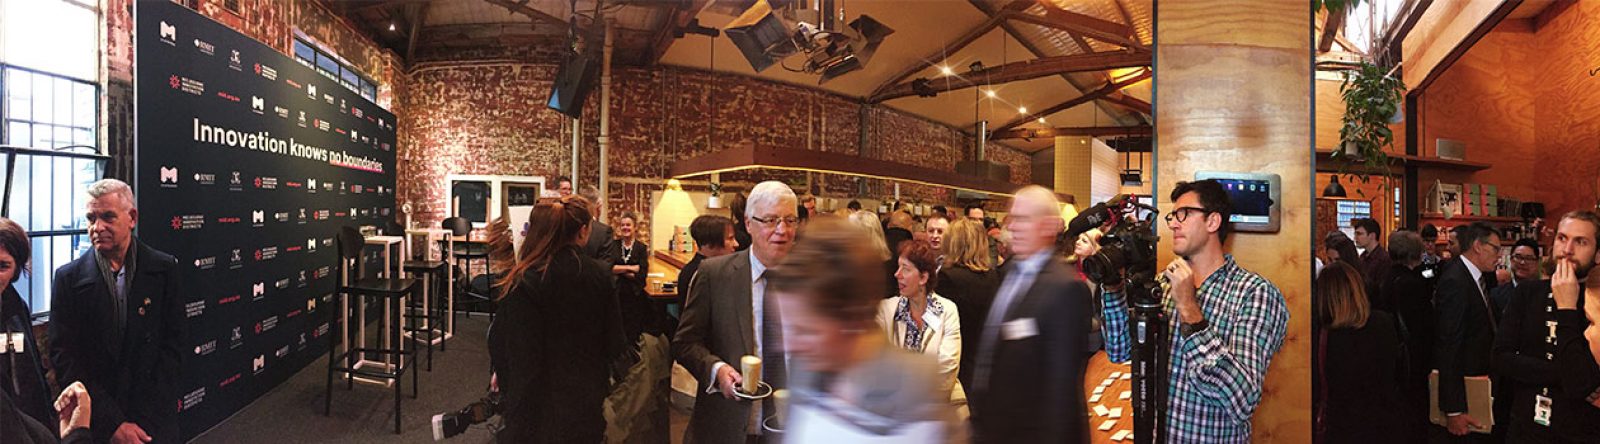 A panoramic view of a launch event space crowded with attendees.